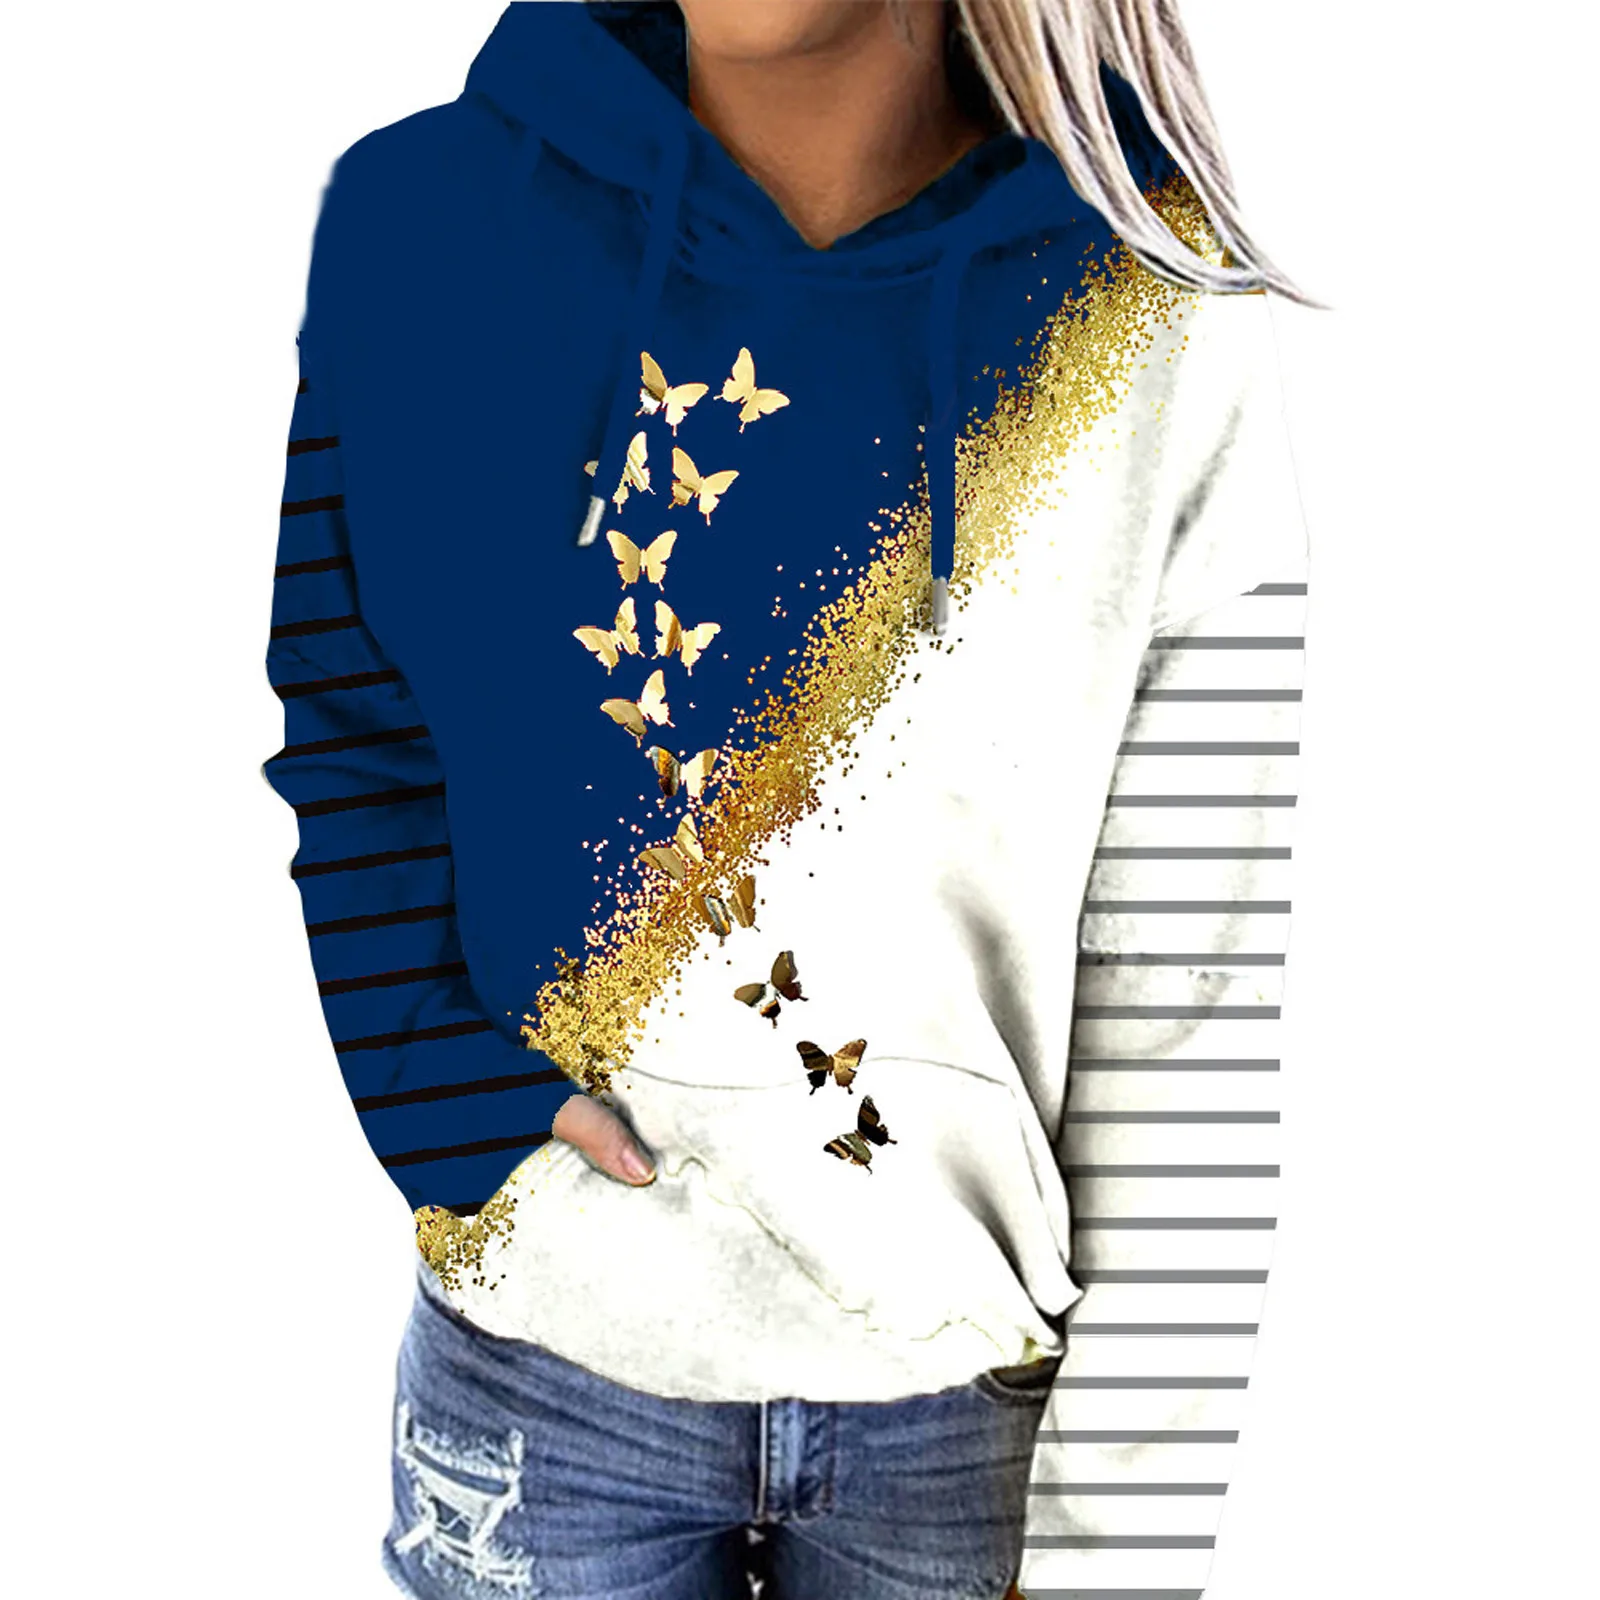 Oversized Hoodies For Women 2021 Autumn Patchwork Bows Pattern Sweatshirts With Pockets Pullovers Hoodies vestment femme